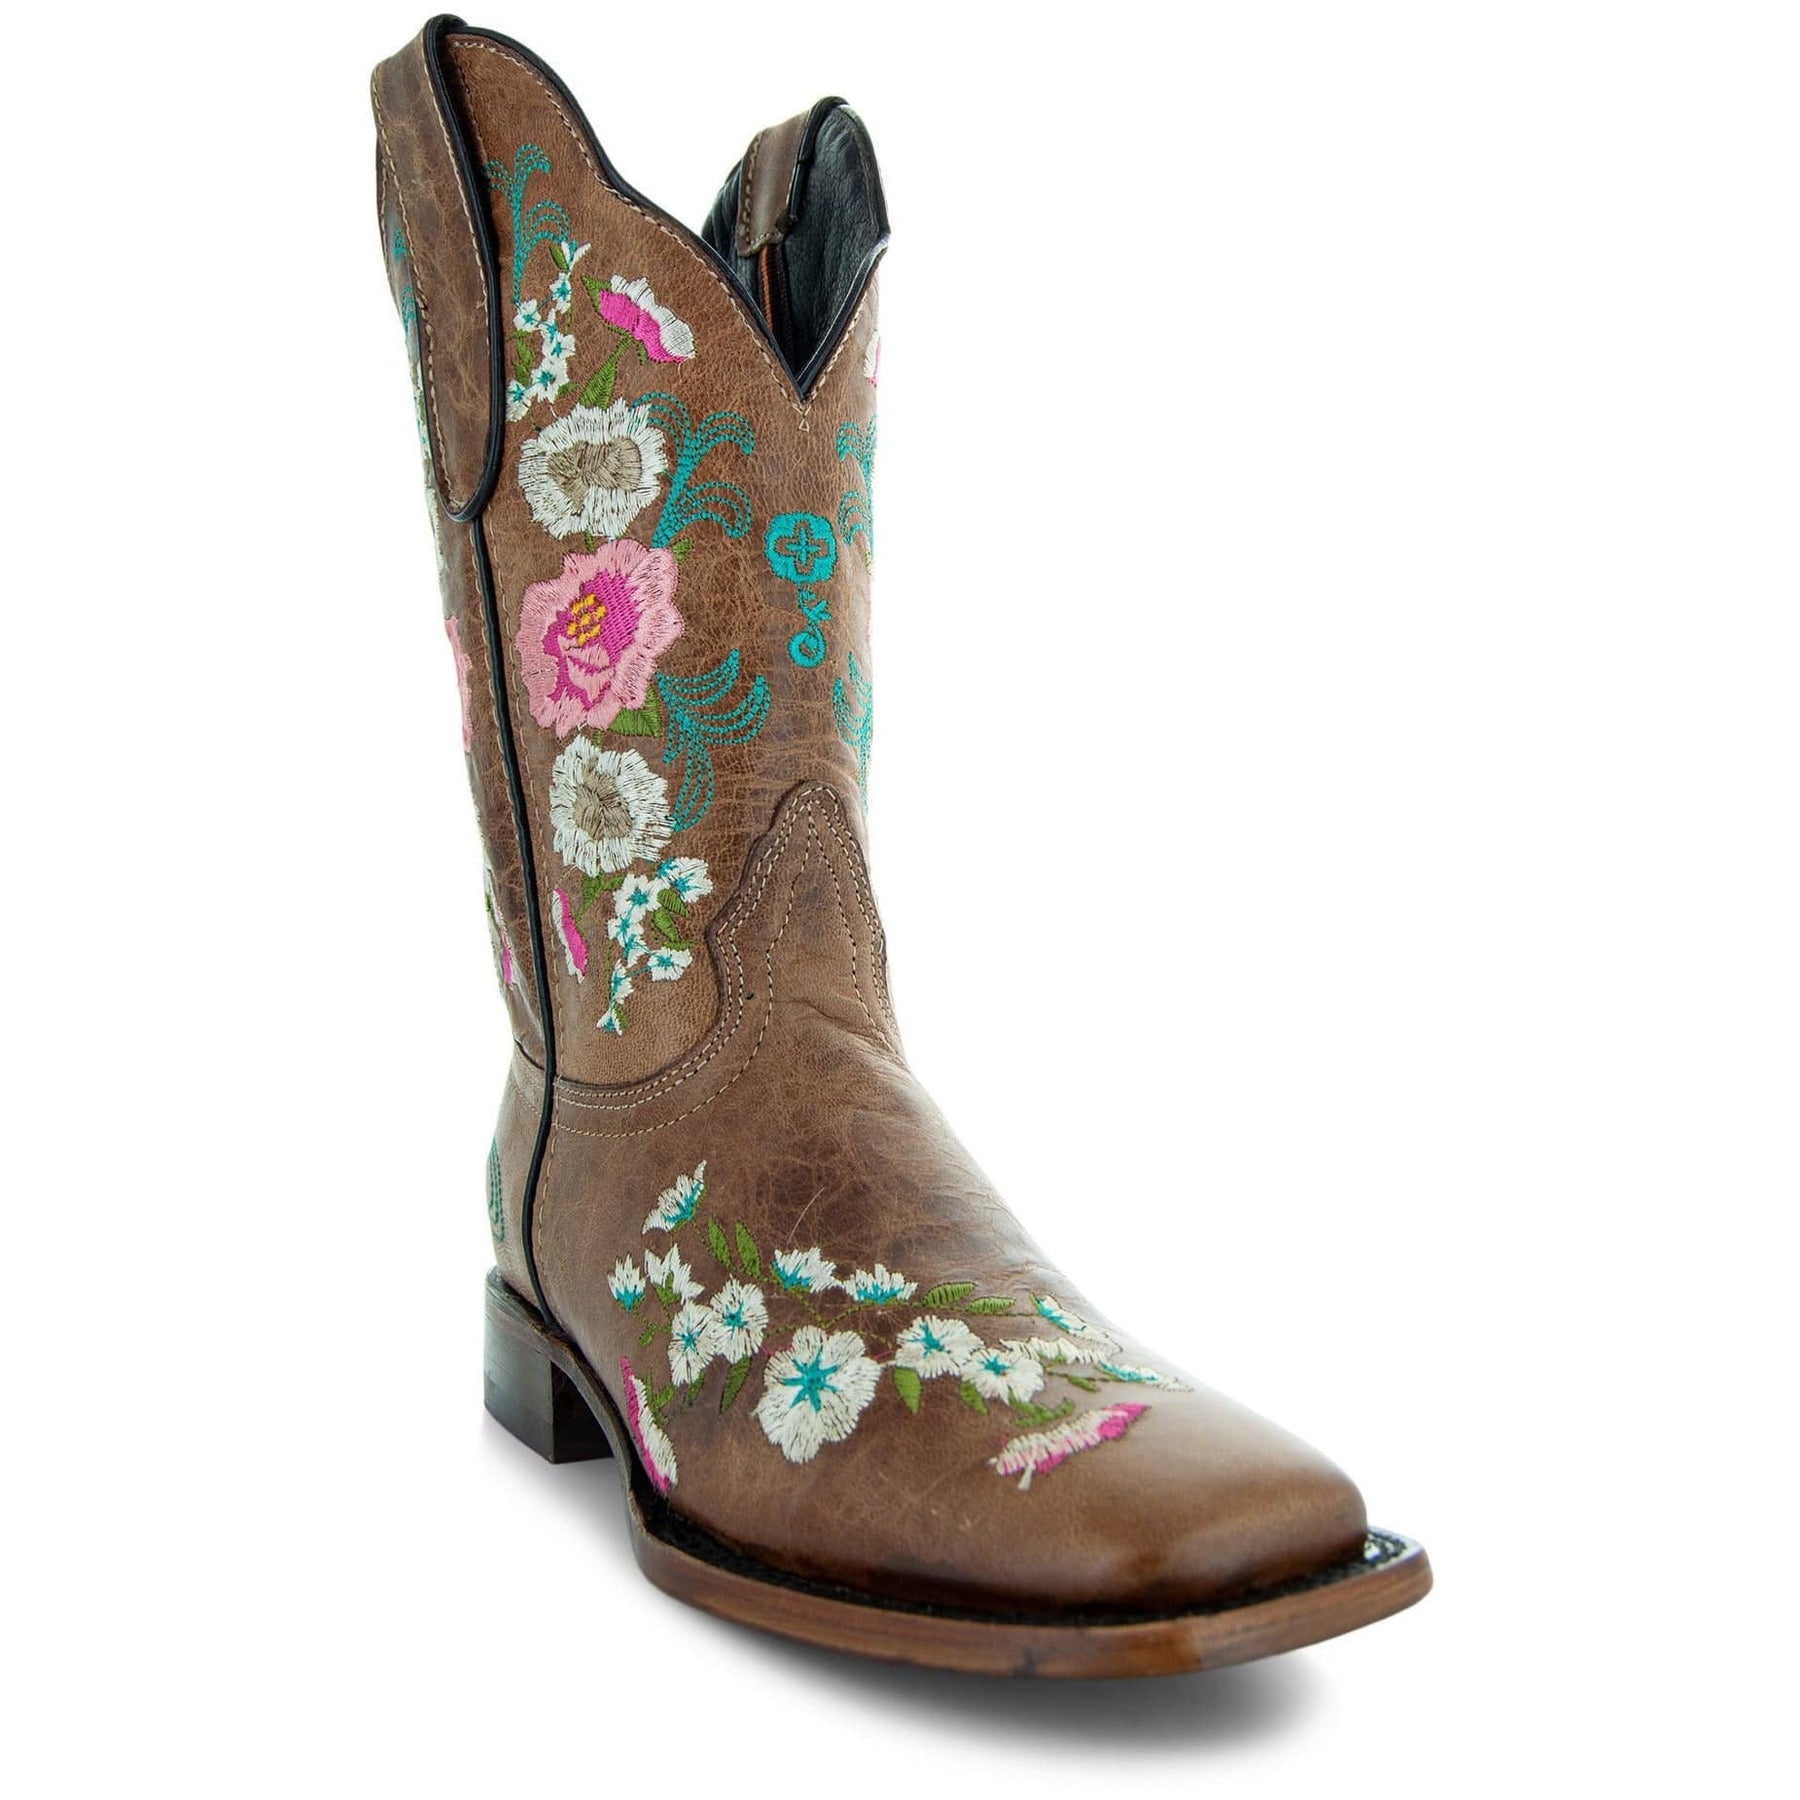 Joe Boots 15-01 Sand Premium Women's Cowboy Embroidered Boots: Square